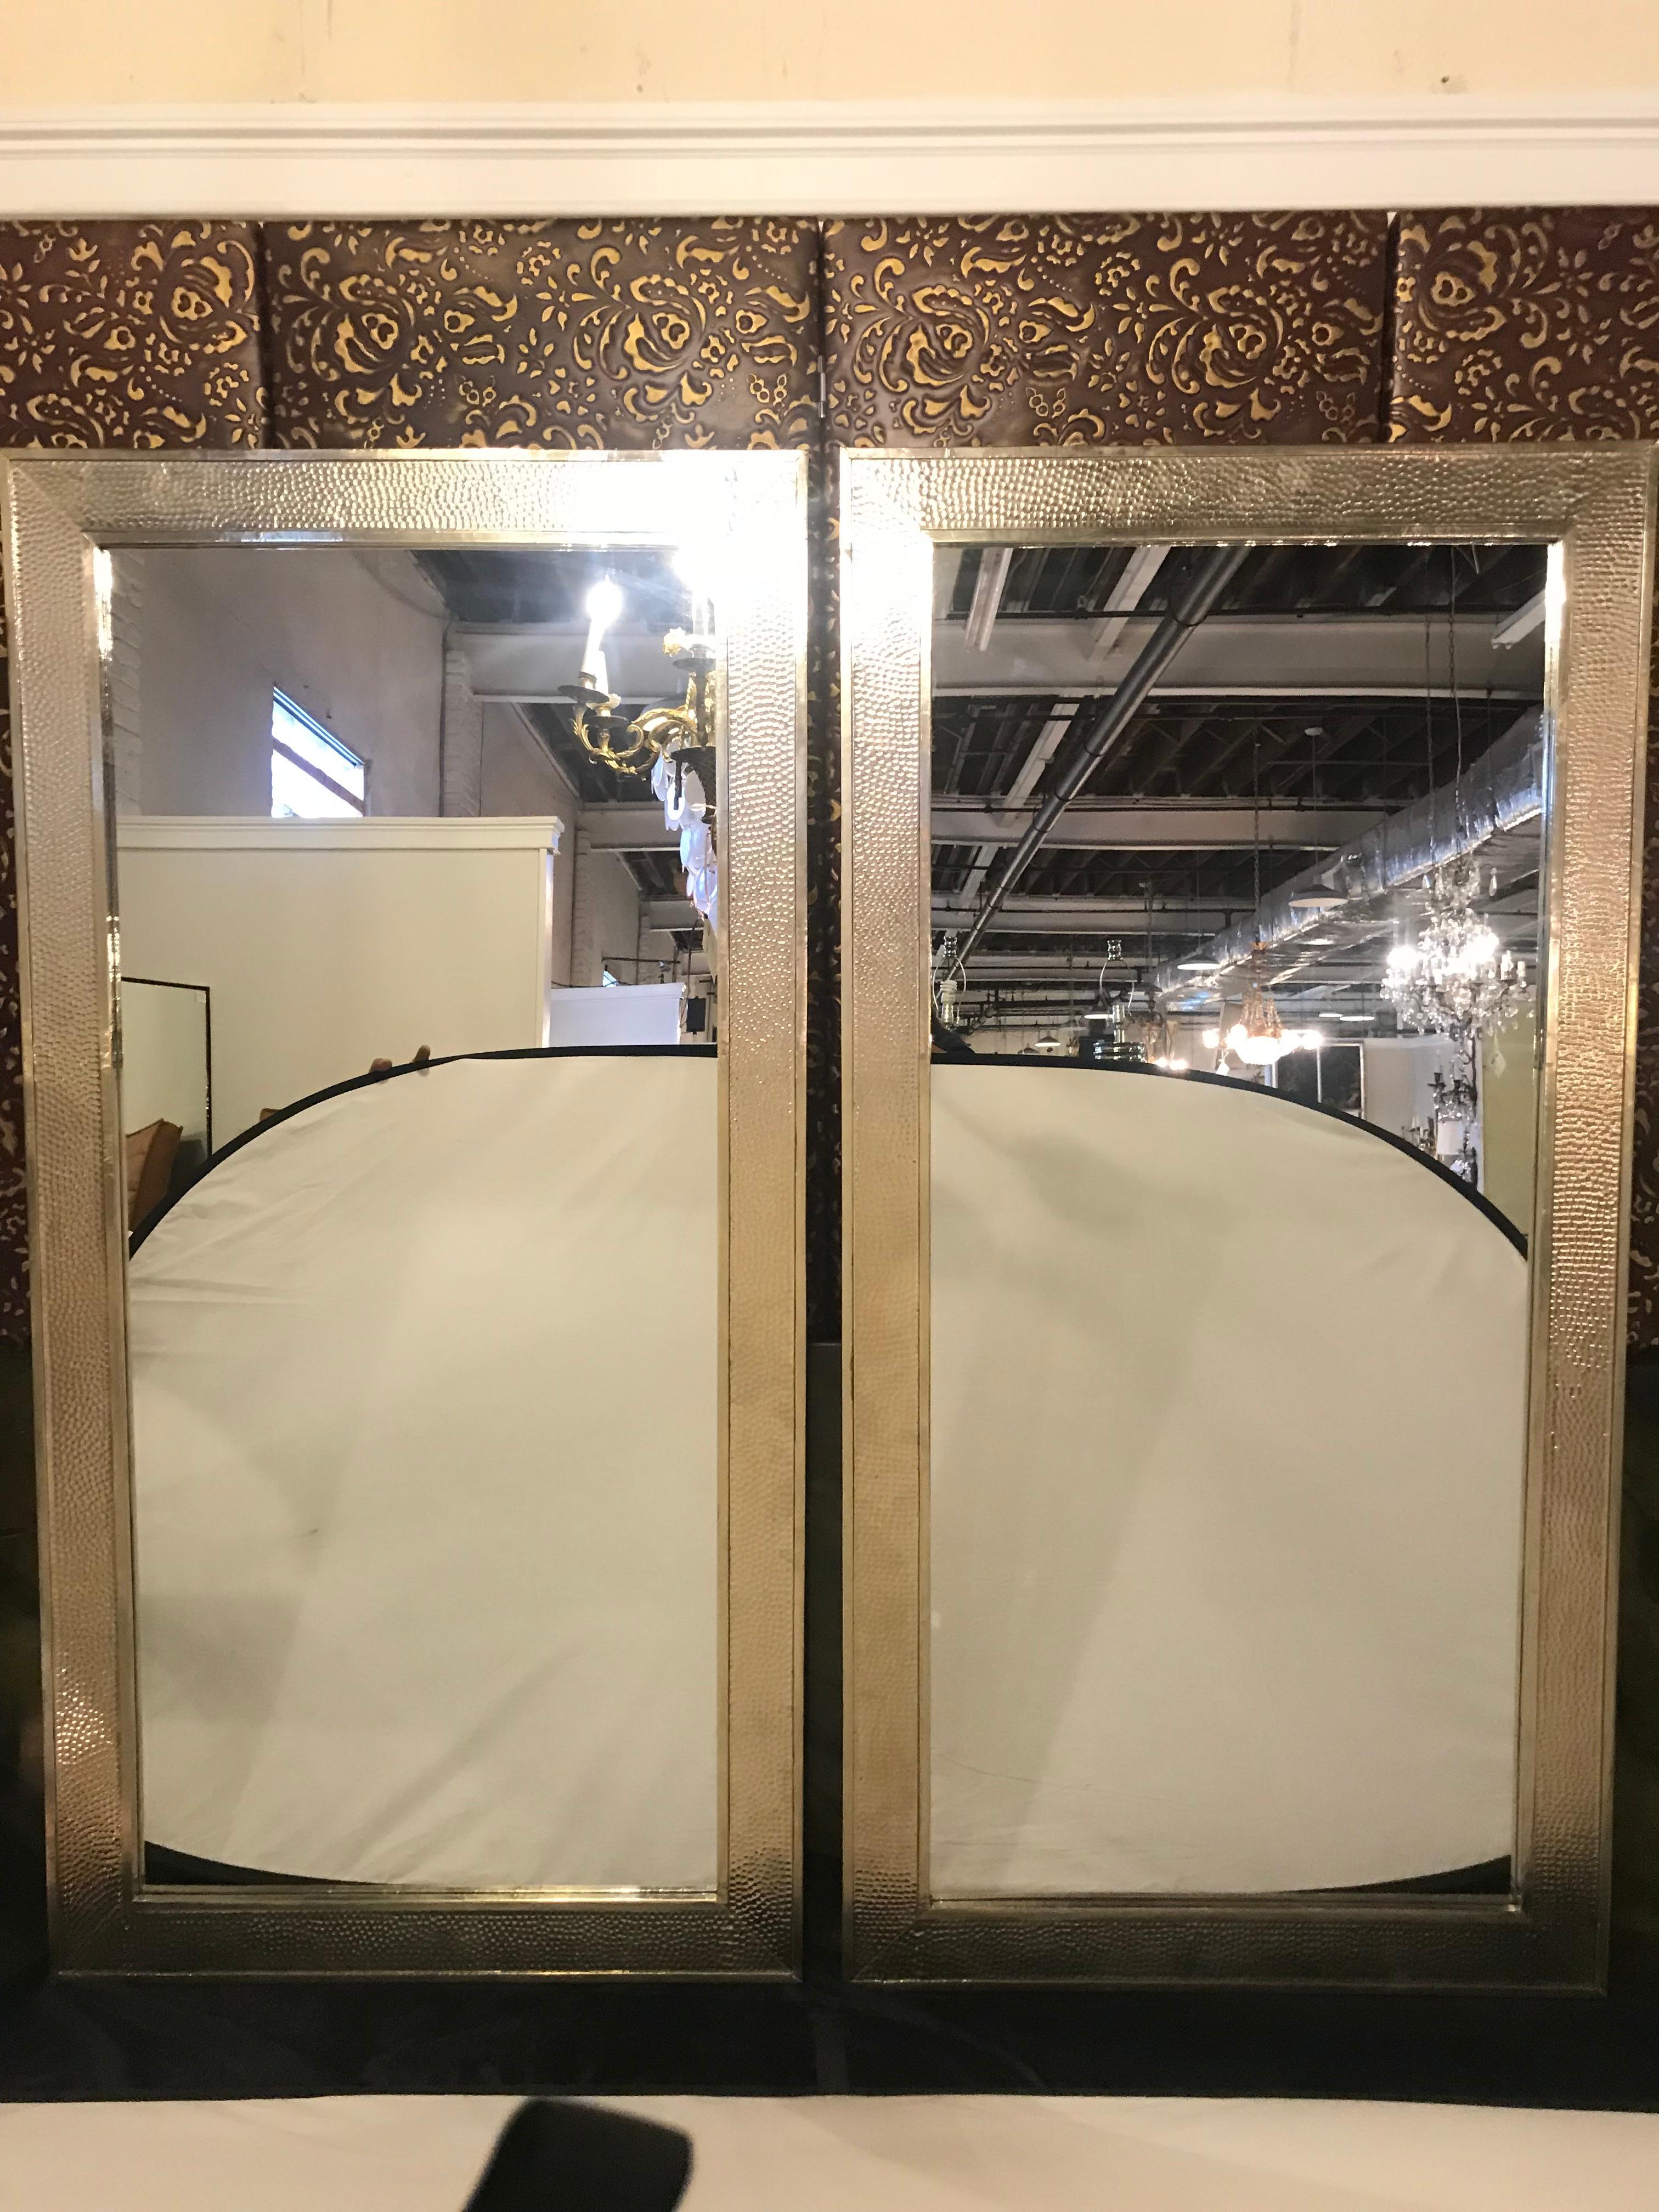 Pair of Mid-Century Modern Paul Evans style white brass wall/ floor or console mirrors. An elegant pair of monumental Mid-Century Modern wall or console mirrors featuring an all hammered style white brass frame. Can be used as wall or floor mirrors.